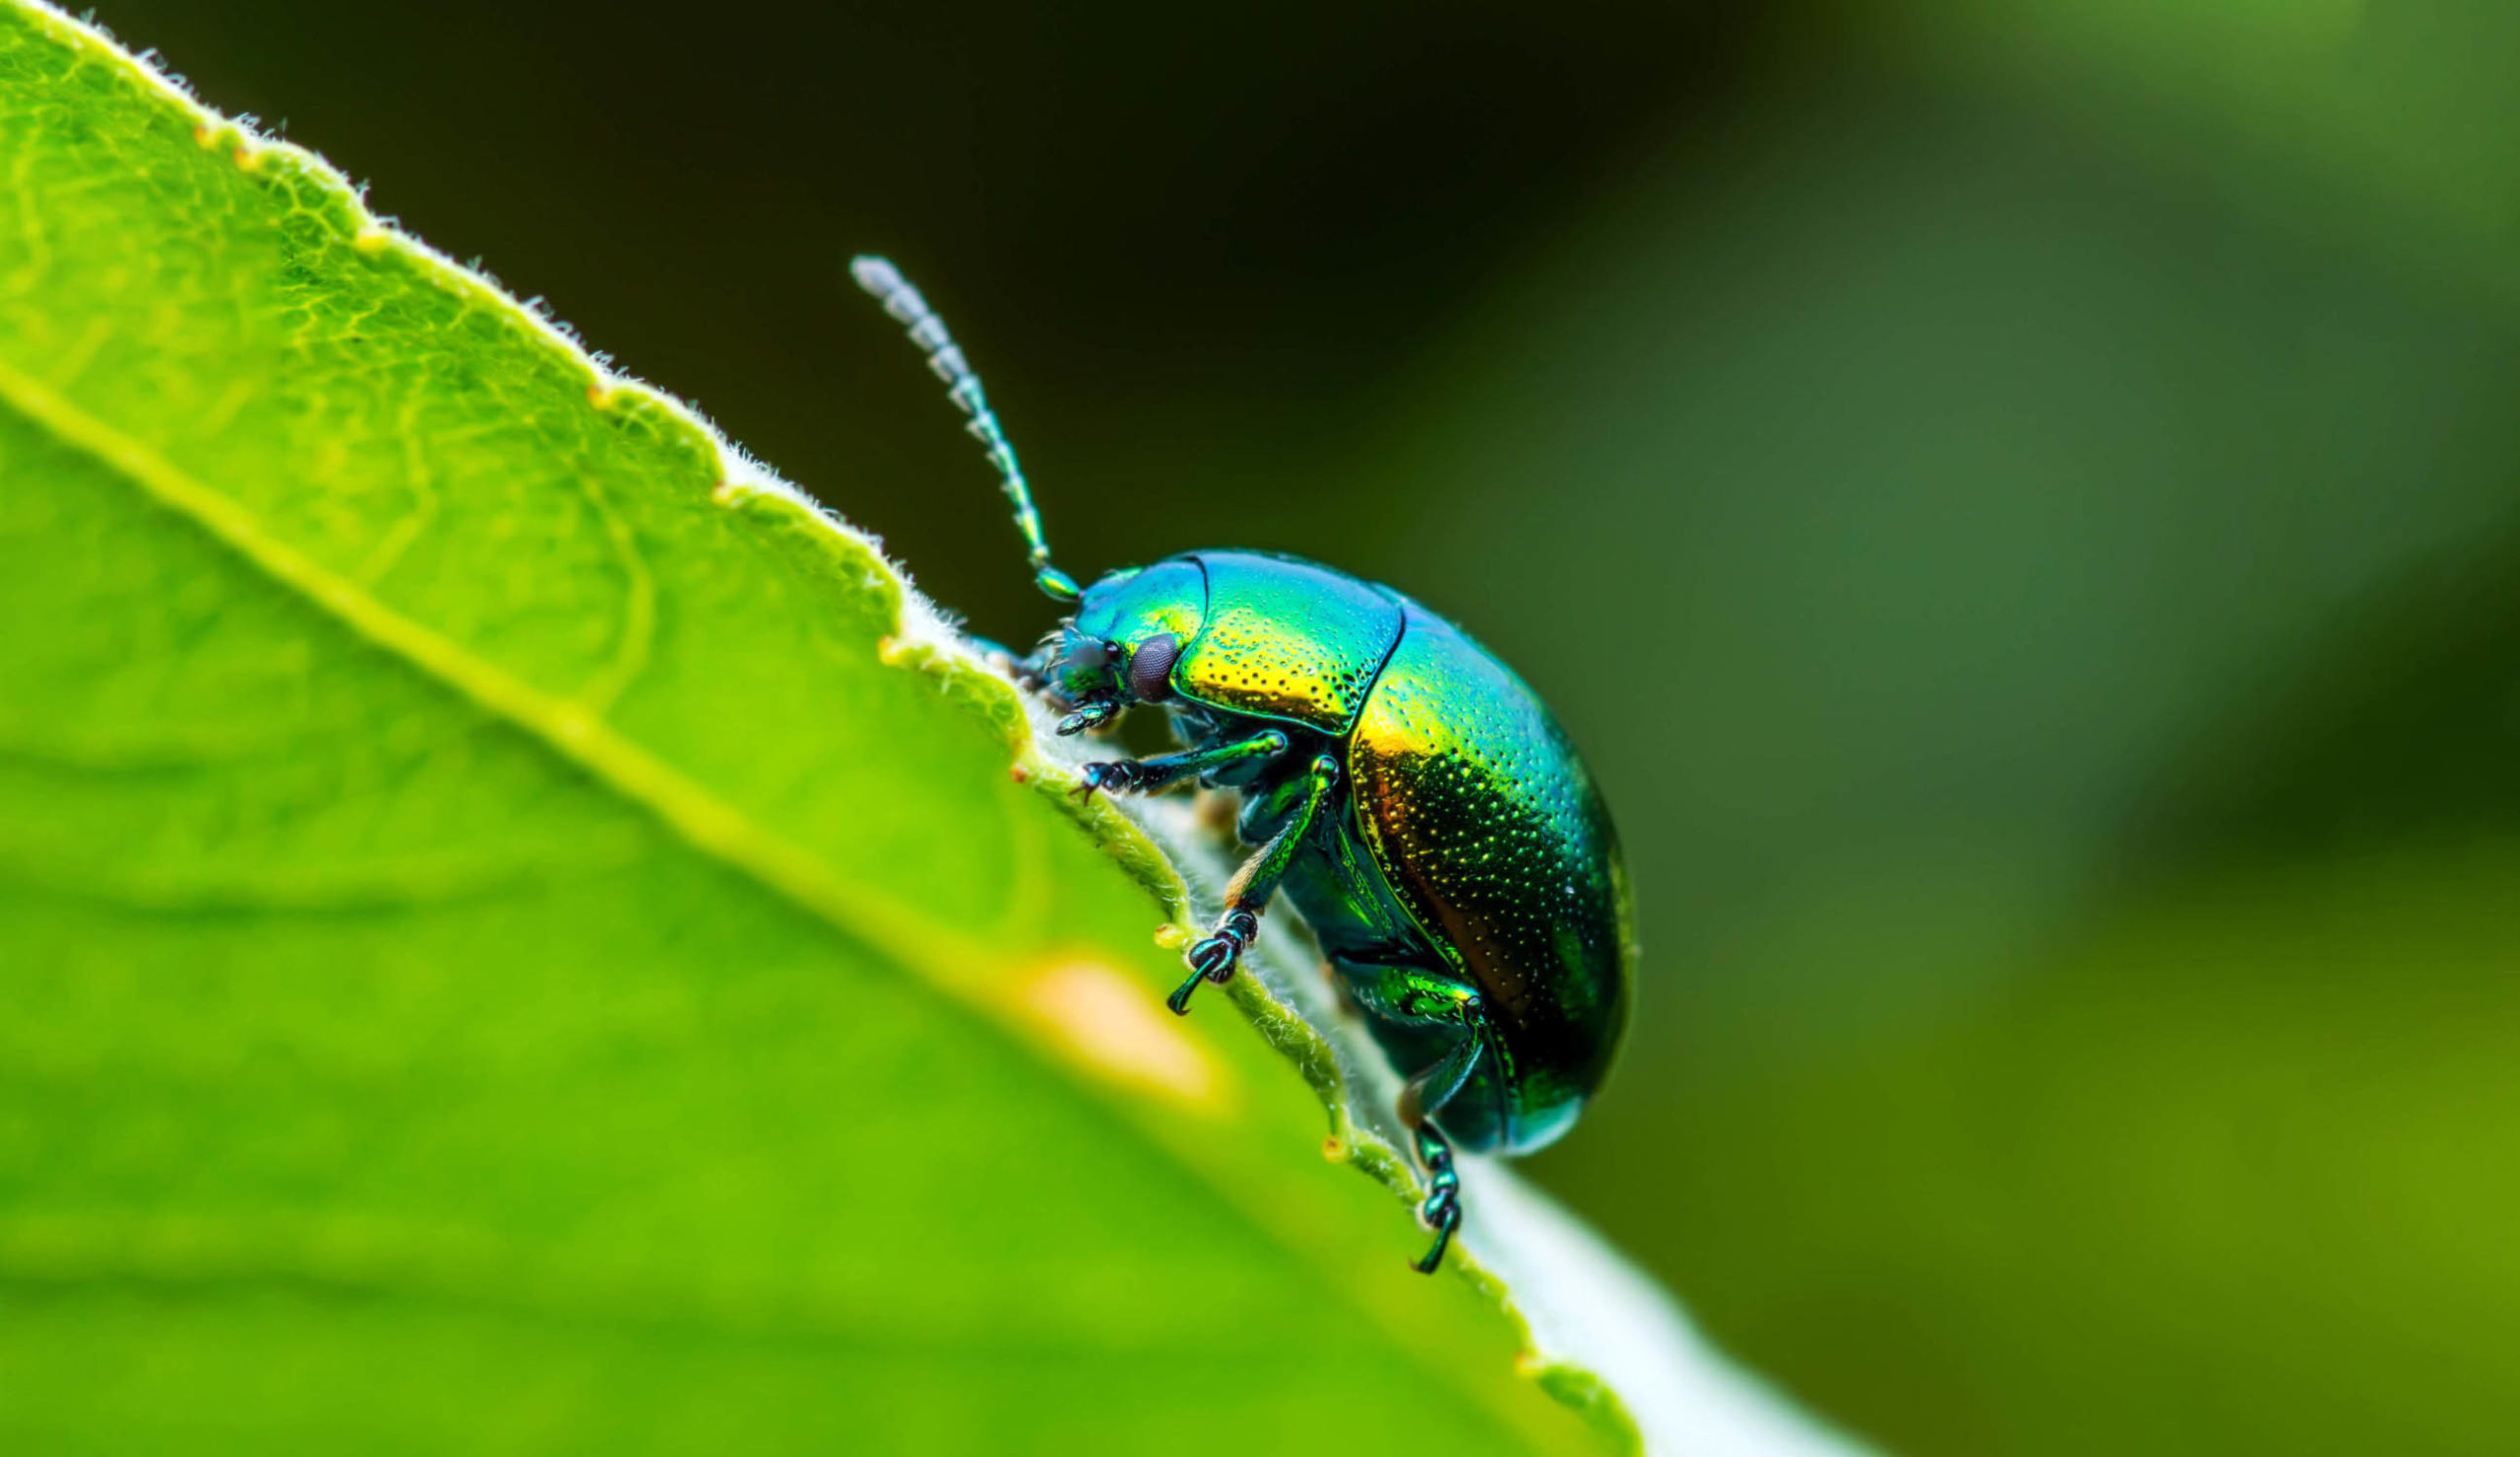 Eat the Beetles? Insects, Climate Change and Food for Thought